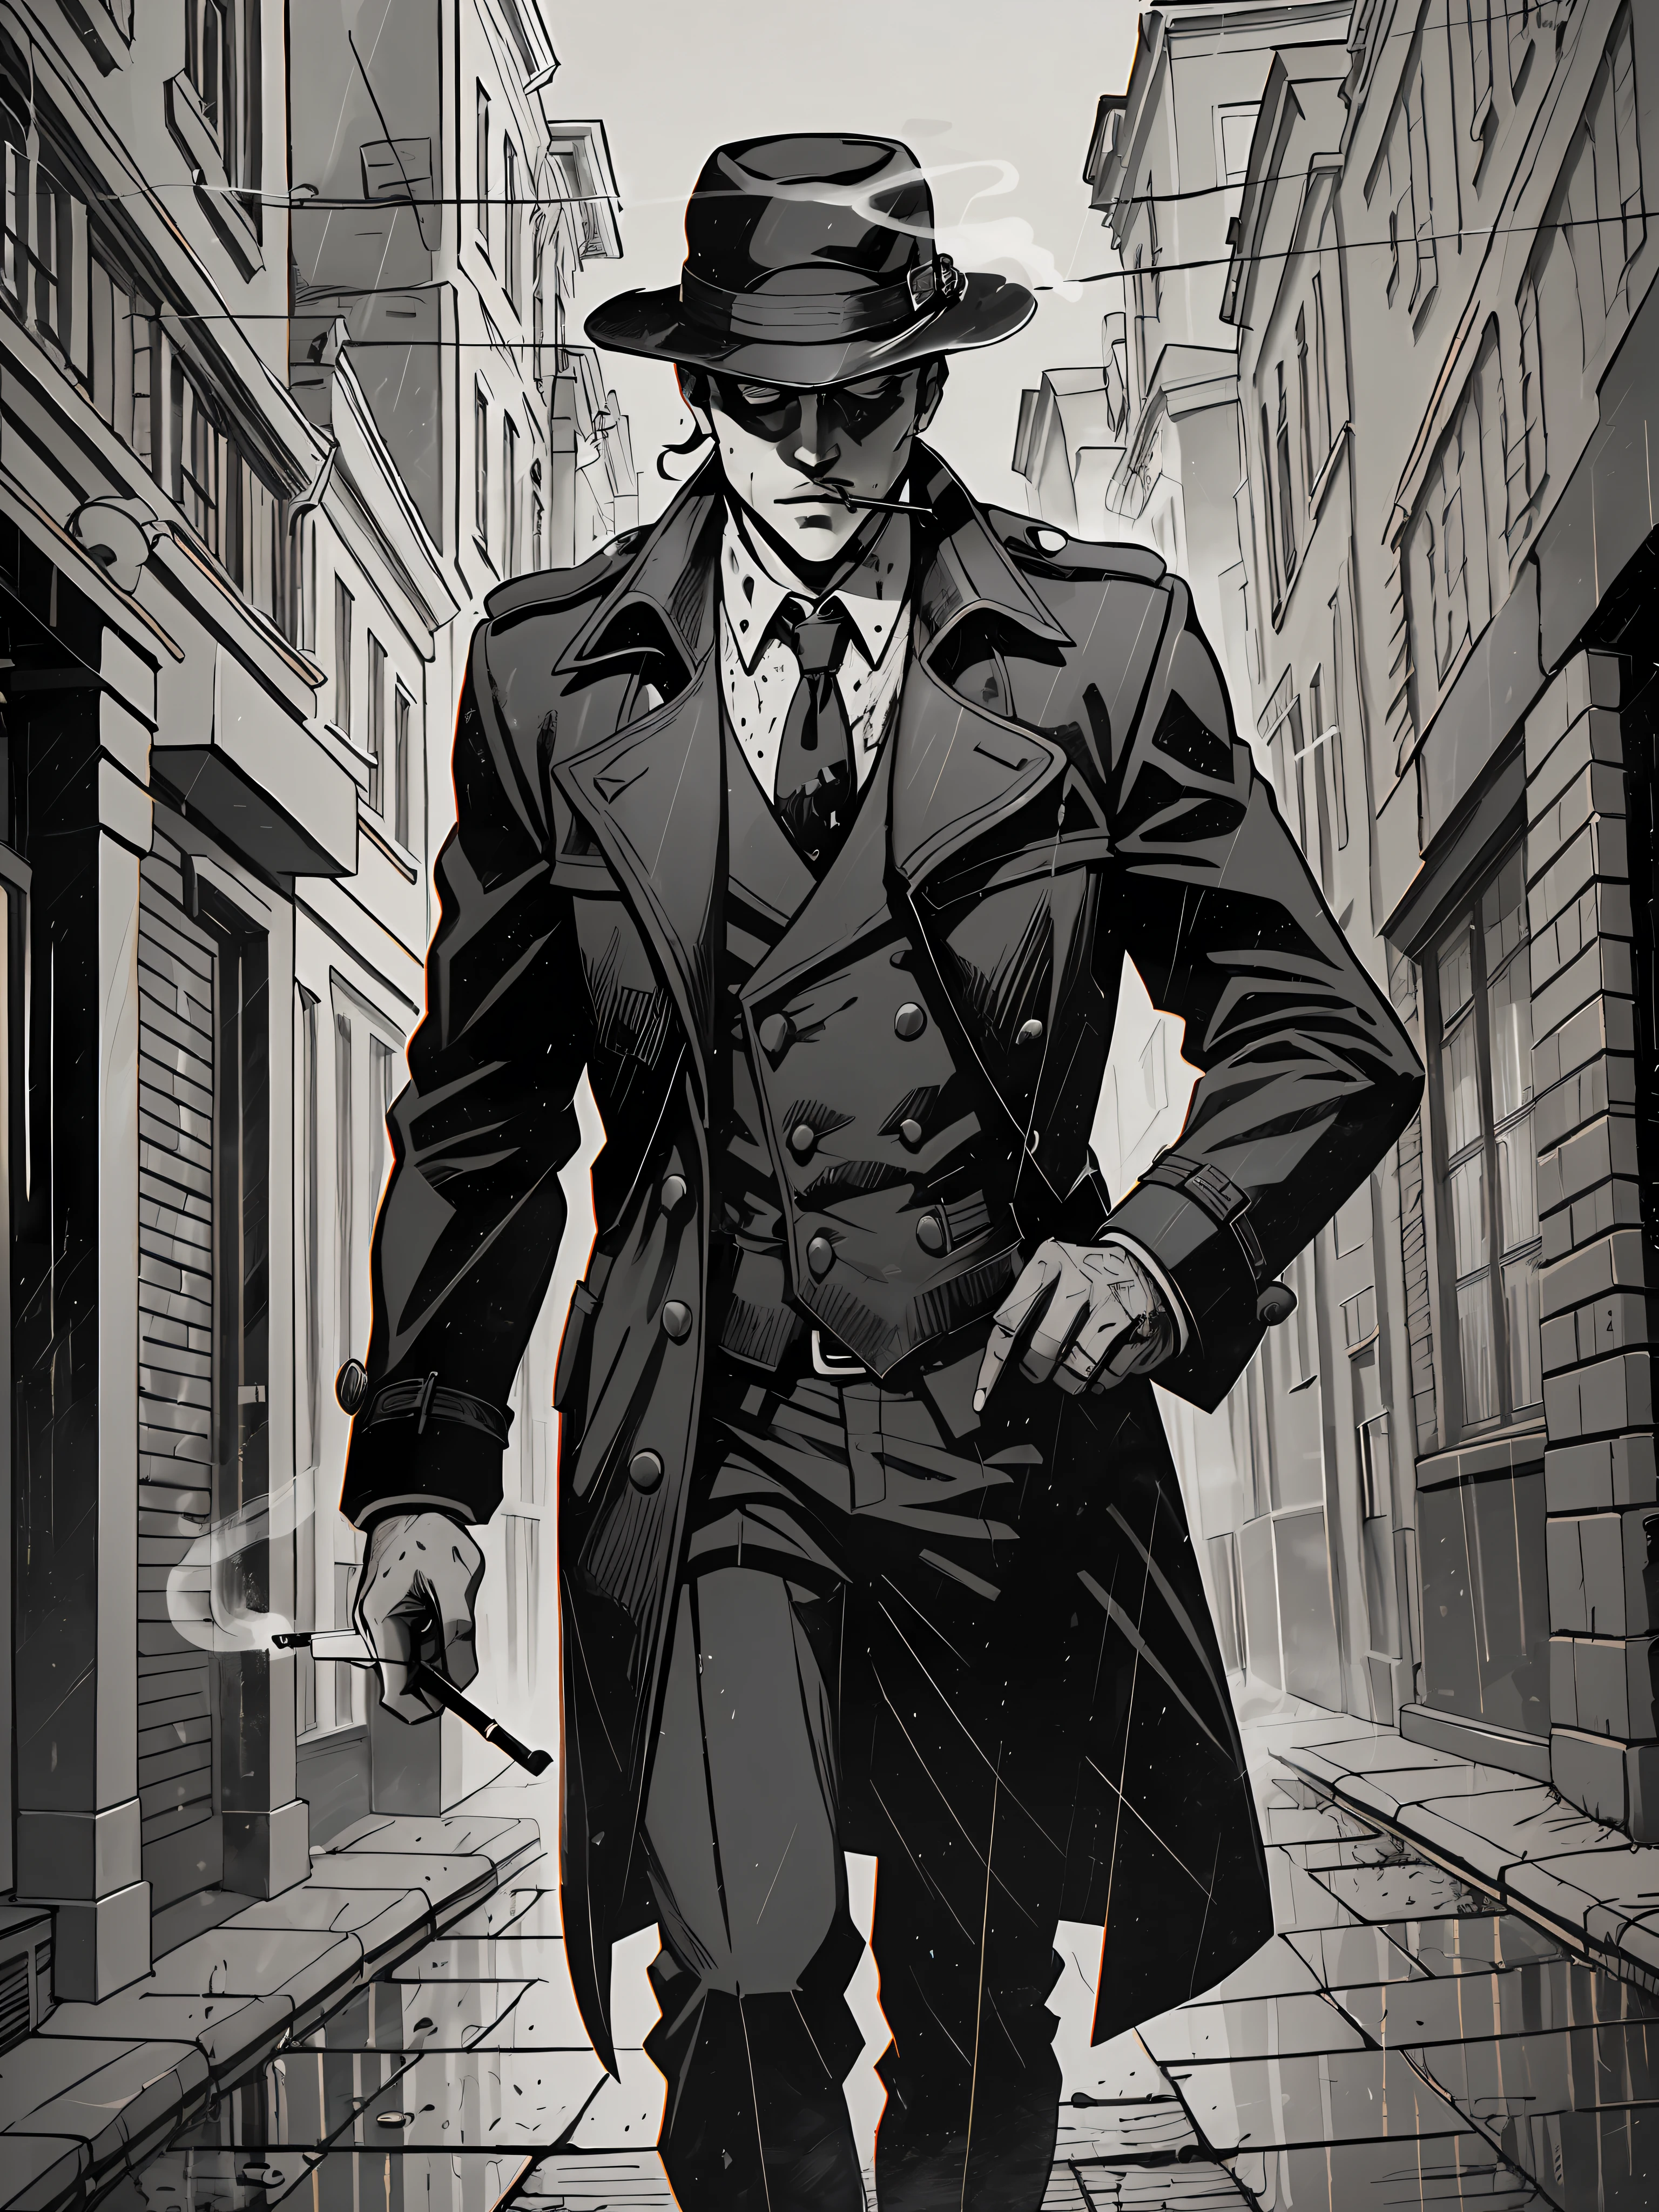 (Noir Comics-style illustration:1.2),(St. Petersburg:1.1), black and white, high contrast, gritty, gloomy, raining, moody, detective in a trench-coat, fedora hat, smoking a cigarette, murder scene, blood-stained weapon, alleyway